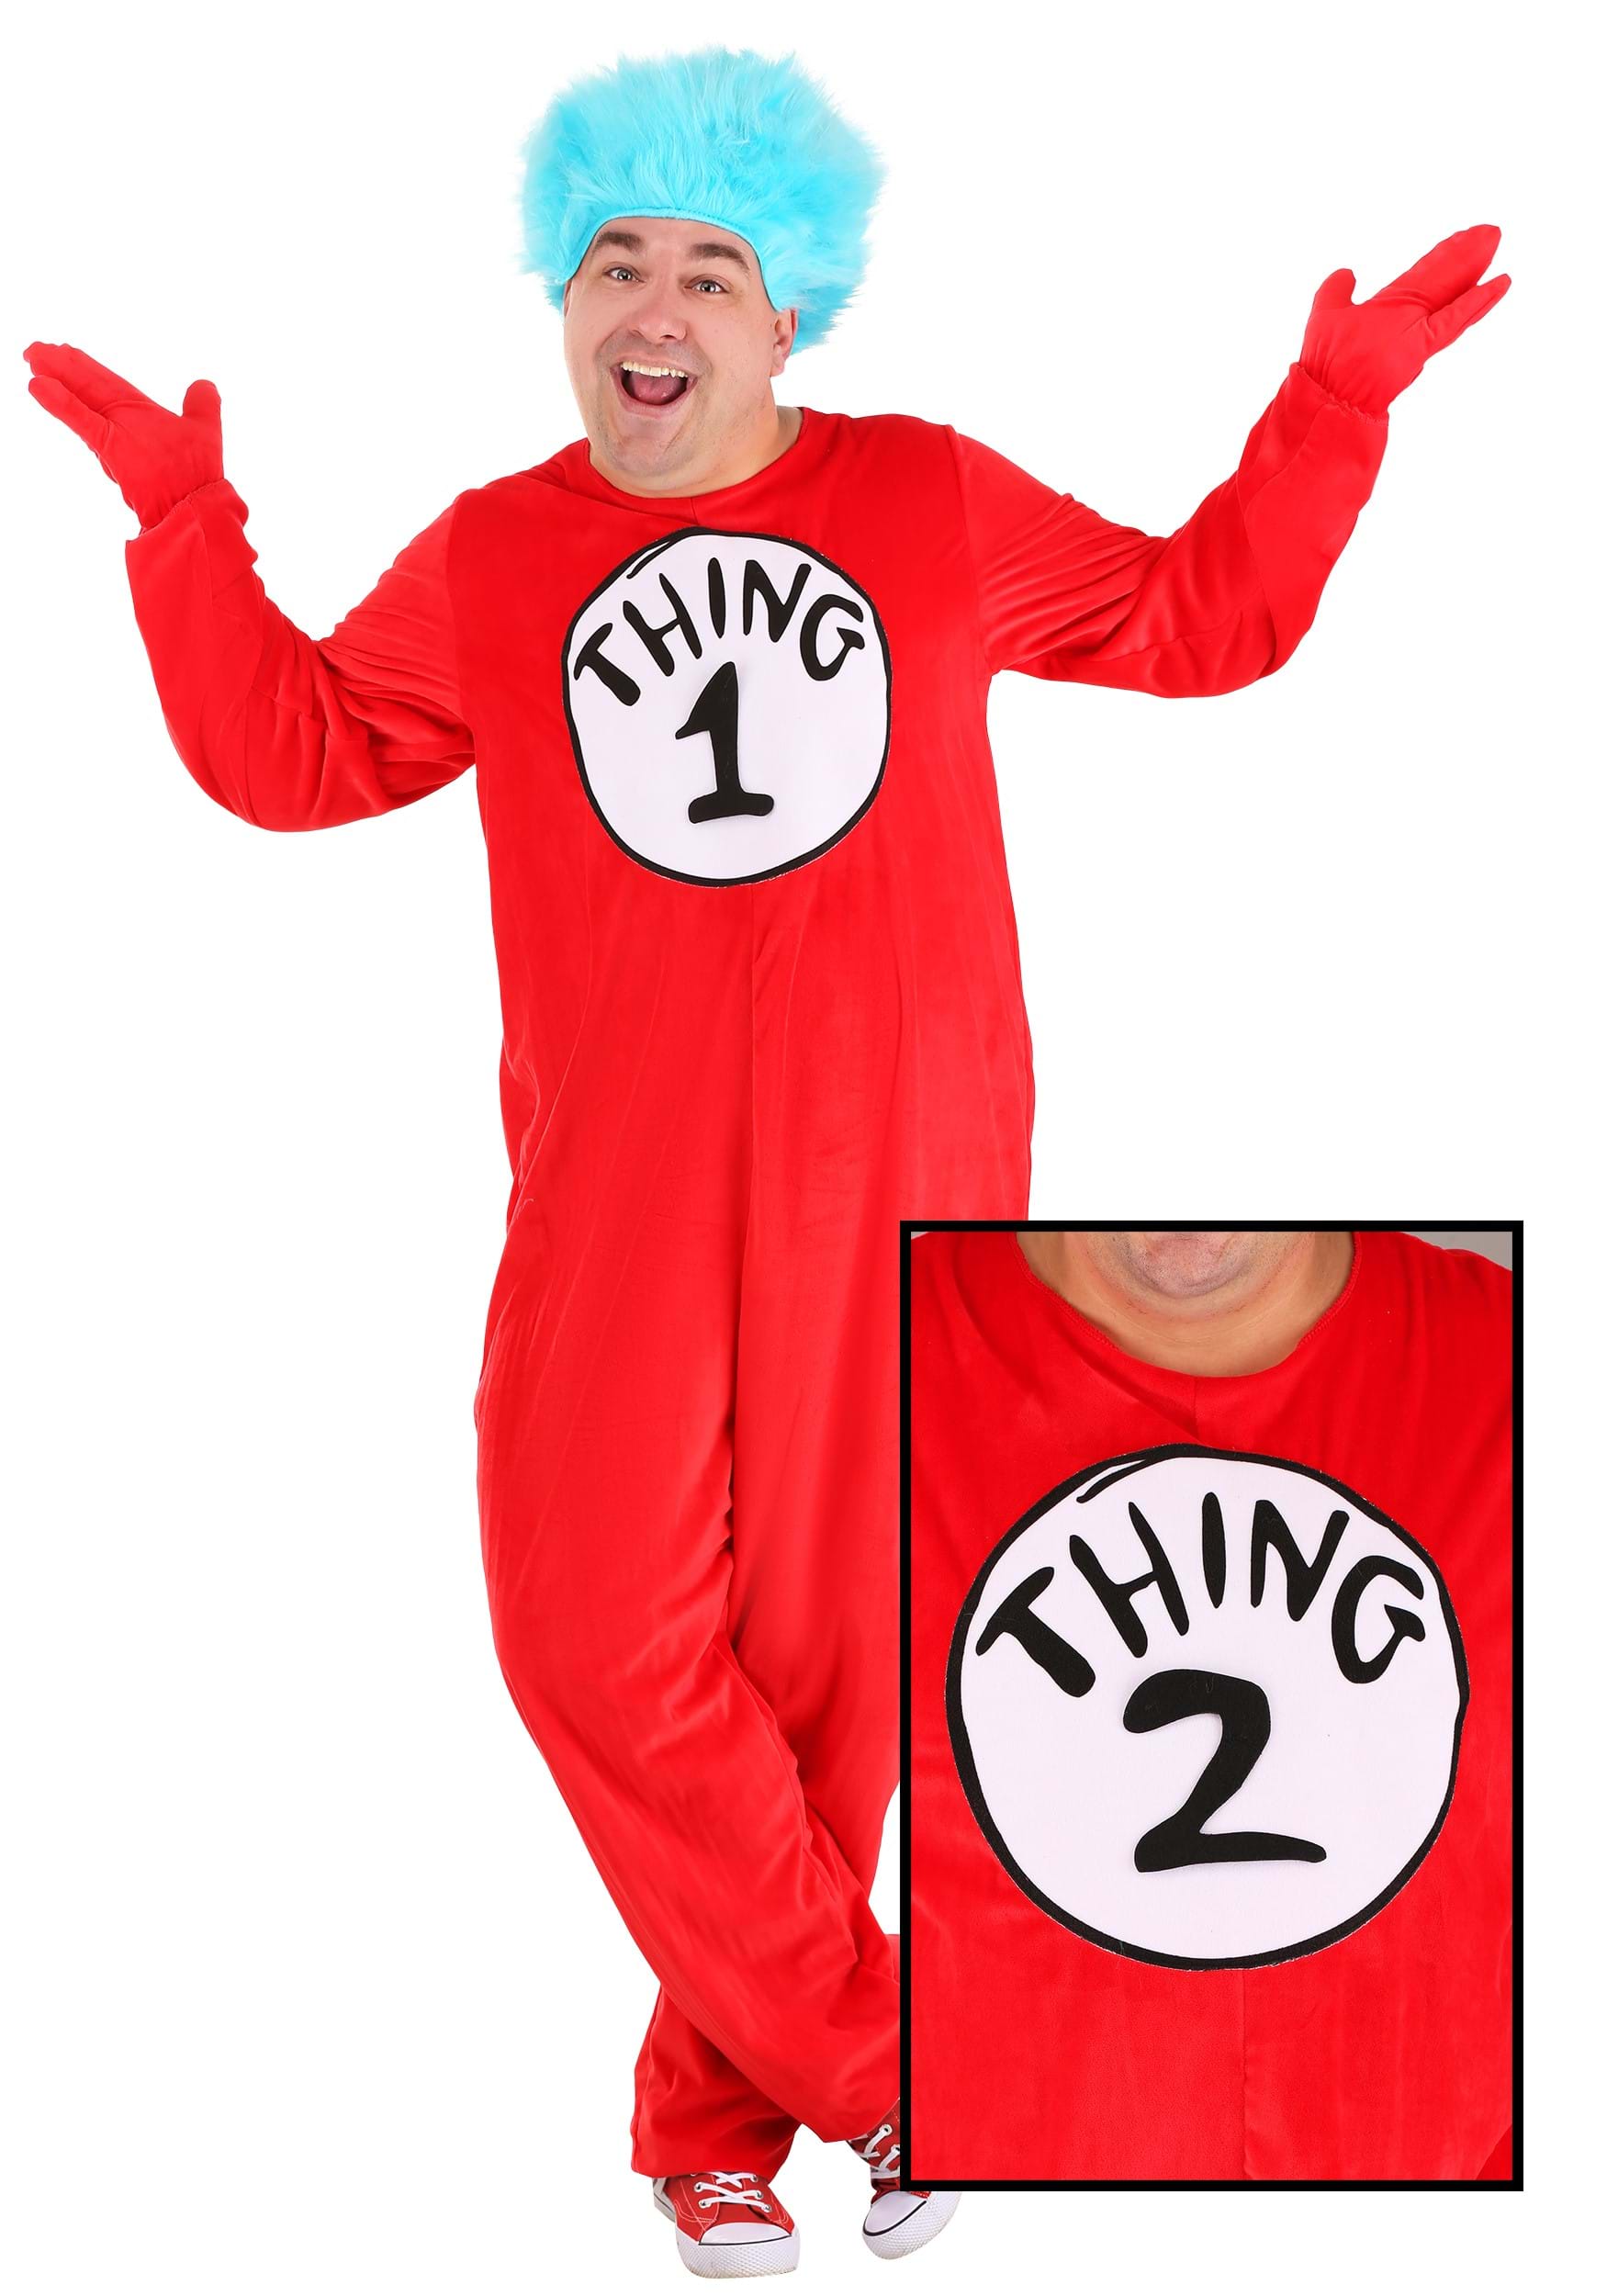 Photos - Fancy Dress FUN Costumes Thing 1&2 Plus Size Costume for Adults Red/Blue EL400619P